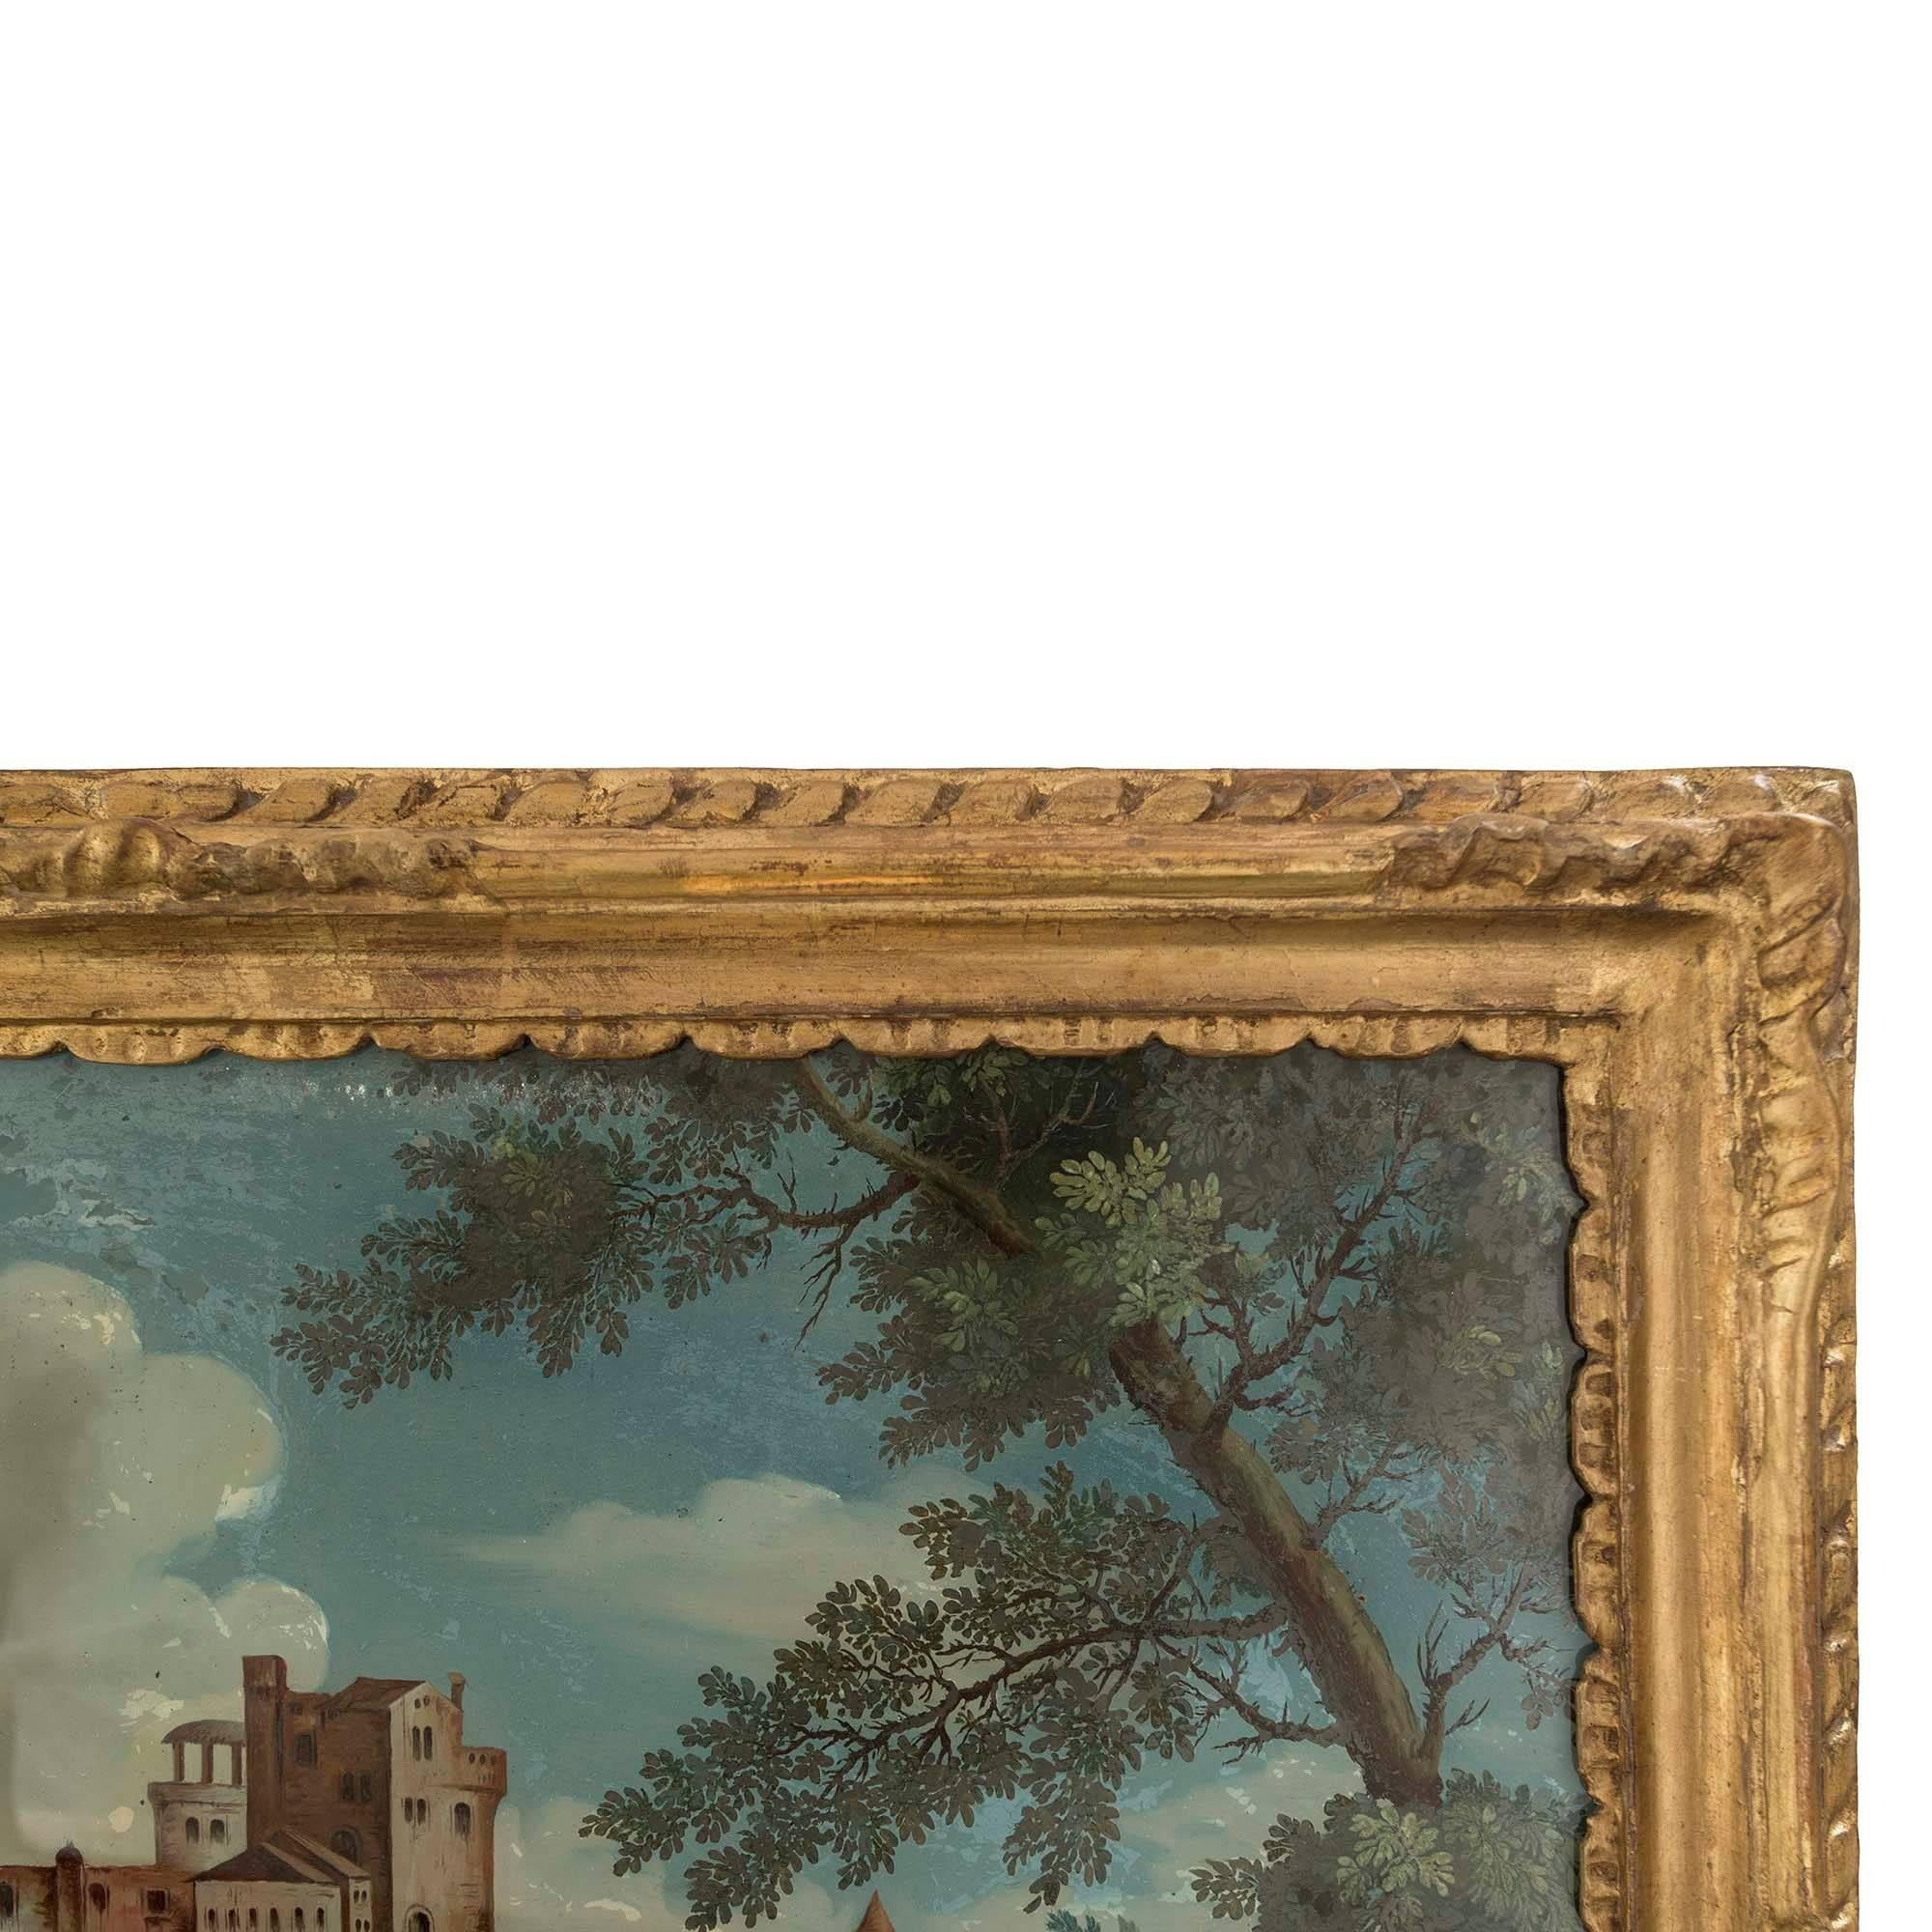 A very decorative 18th century Venetian reverse painted on glass. The painting is of a landscape with figures next to a river, some pulling a fishing net while others are conversing and fixing a fence. The landscape leads to the town's medieval